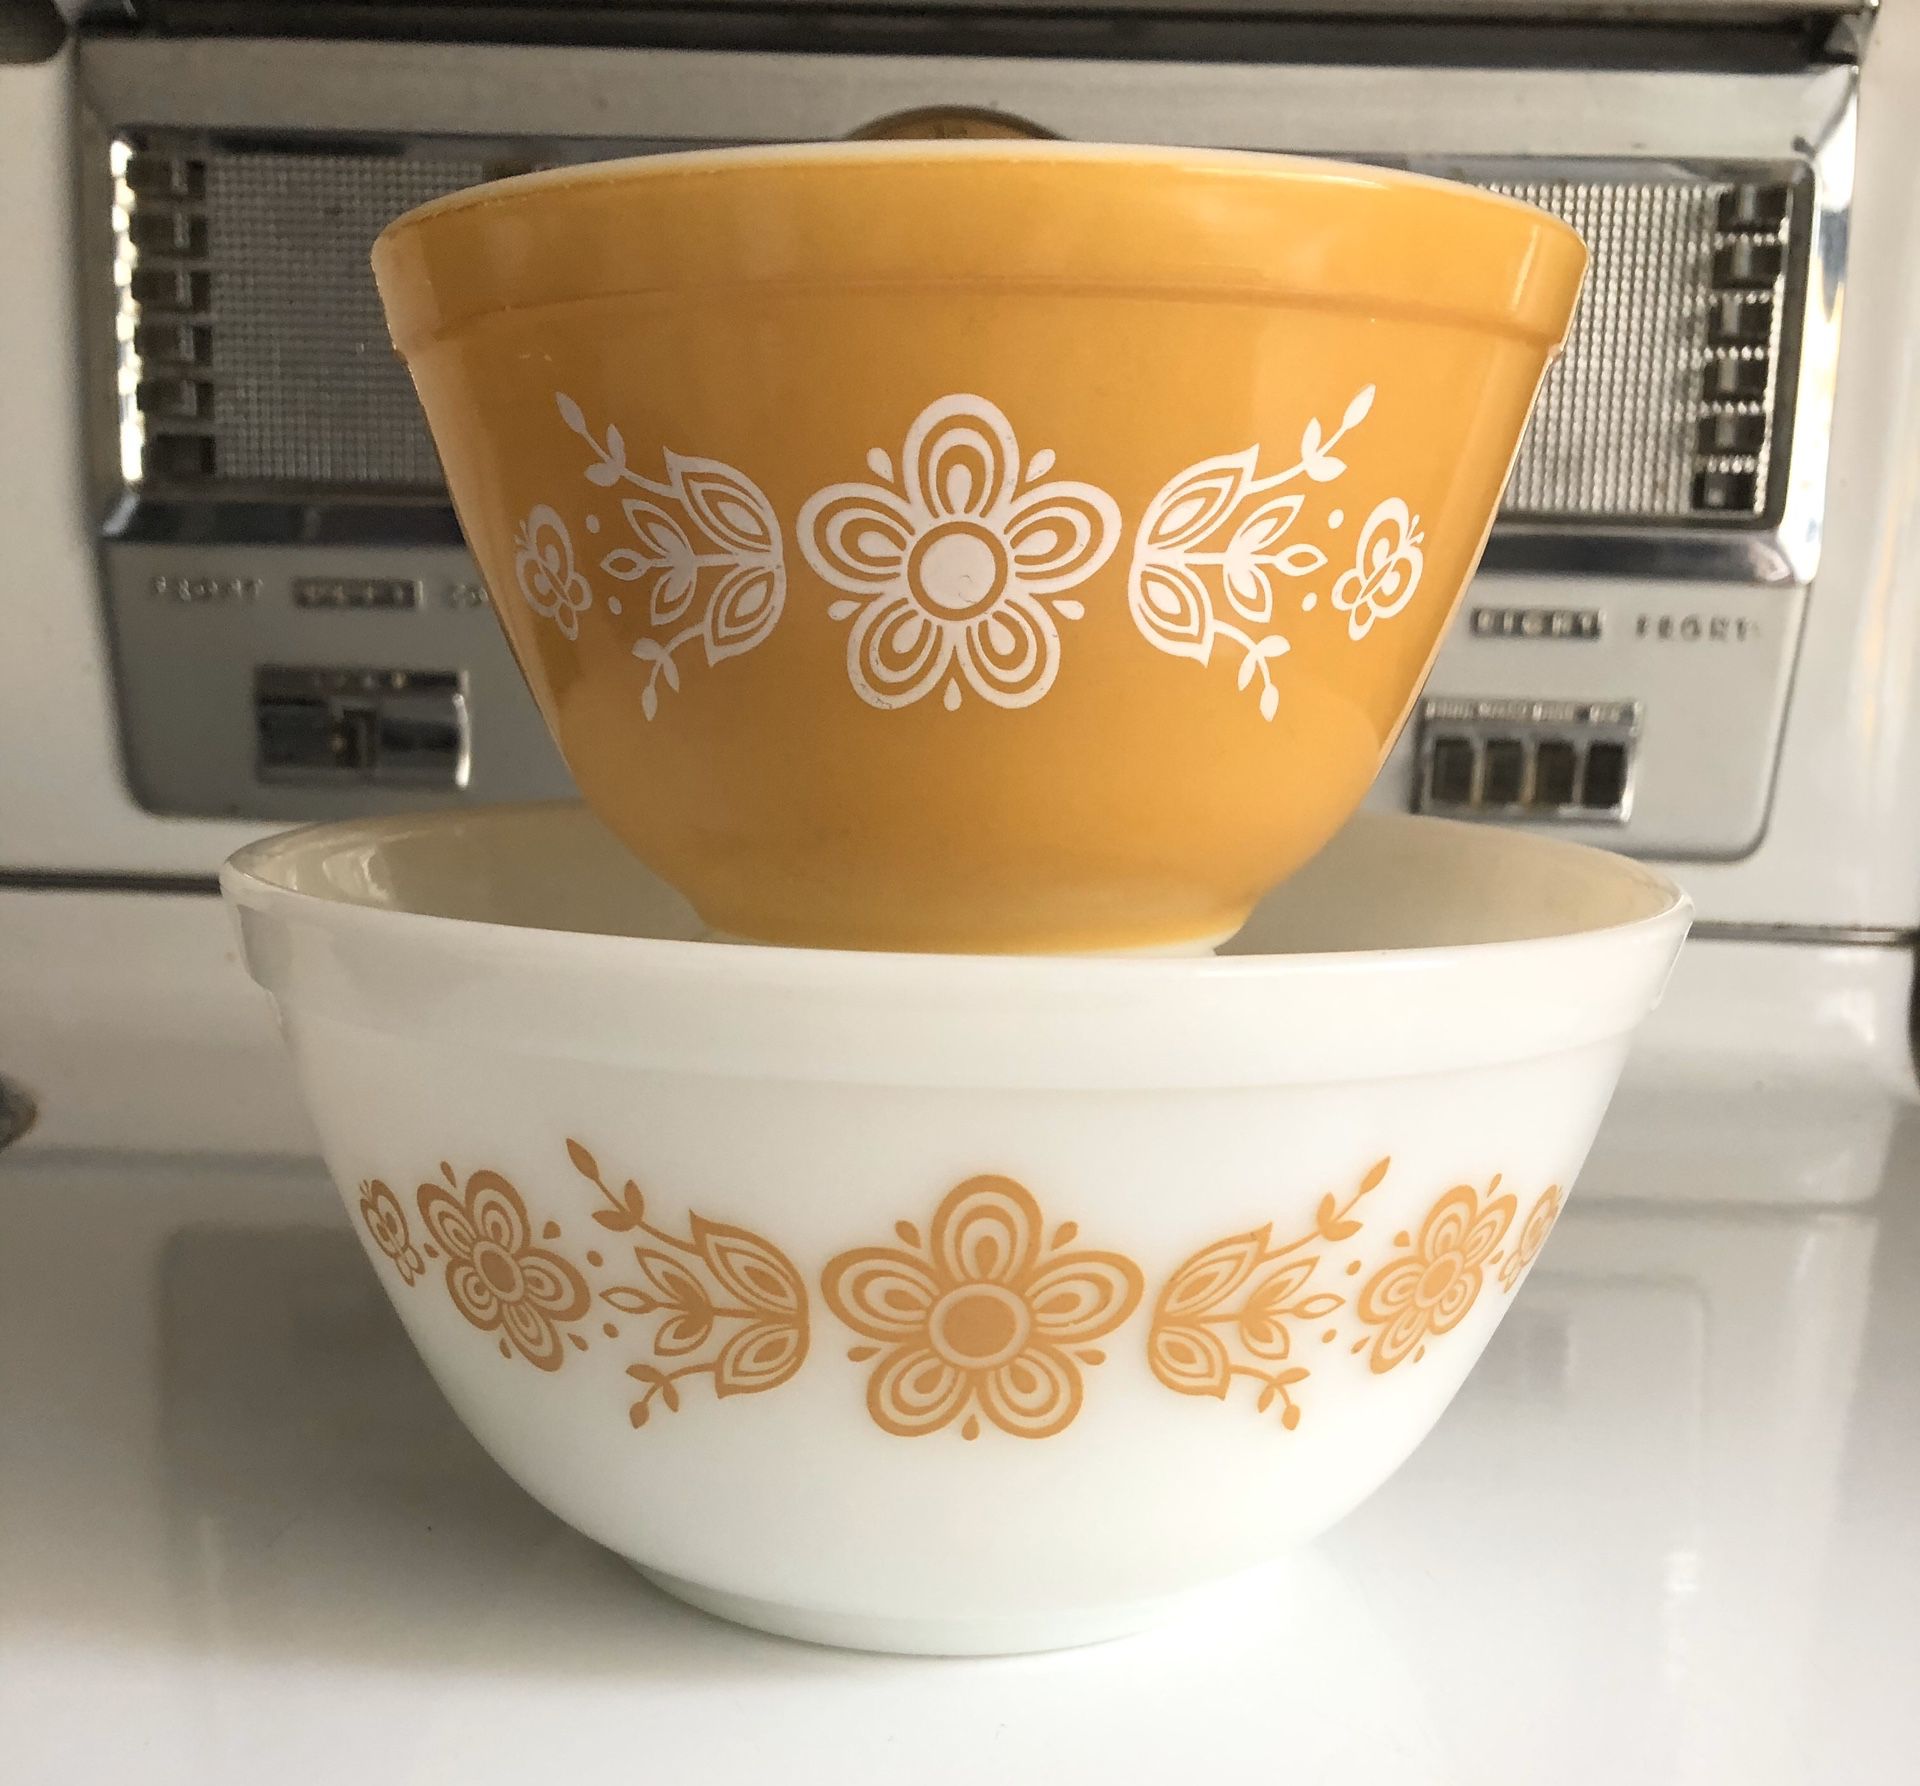 Vintage Pyrex Mixing Bowls, Butterfly Gold, 401 402